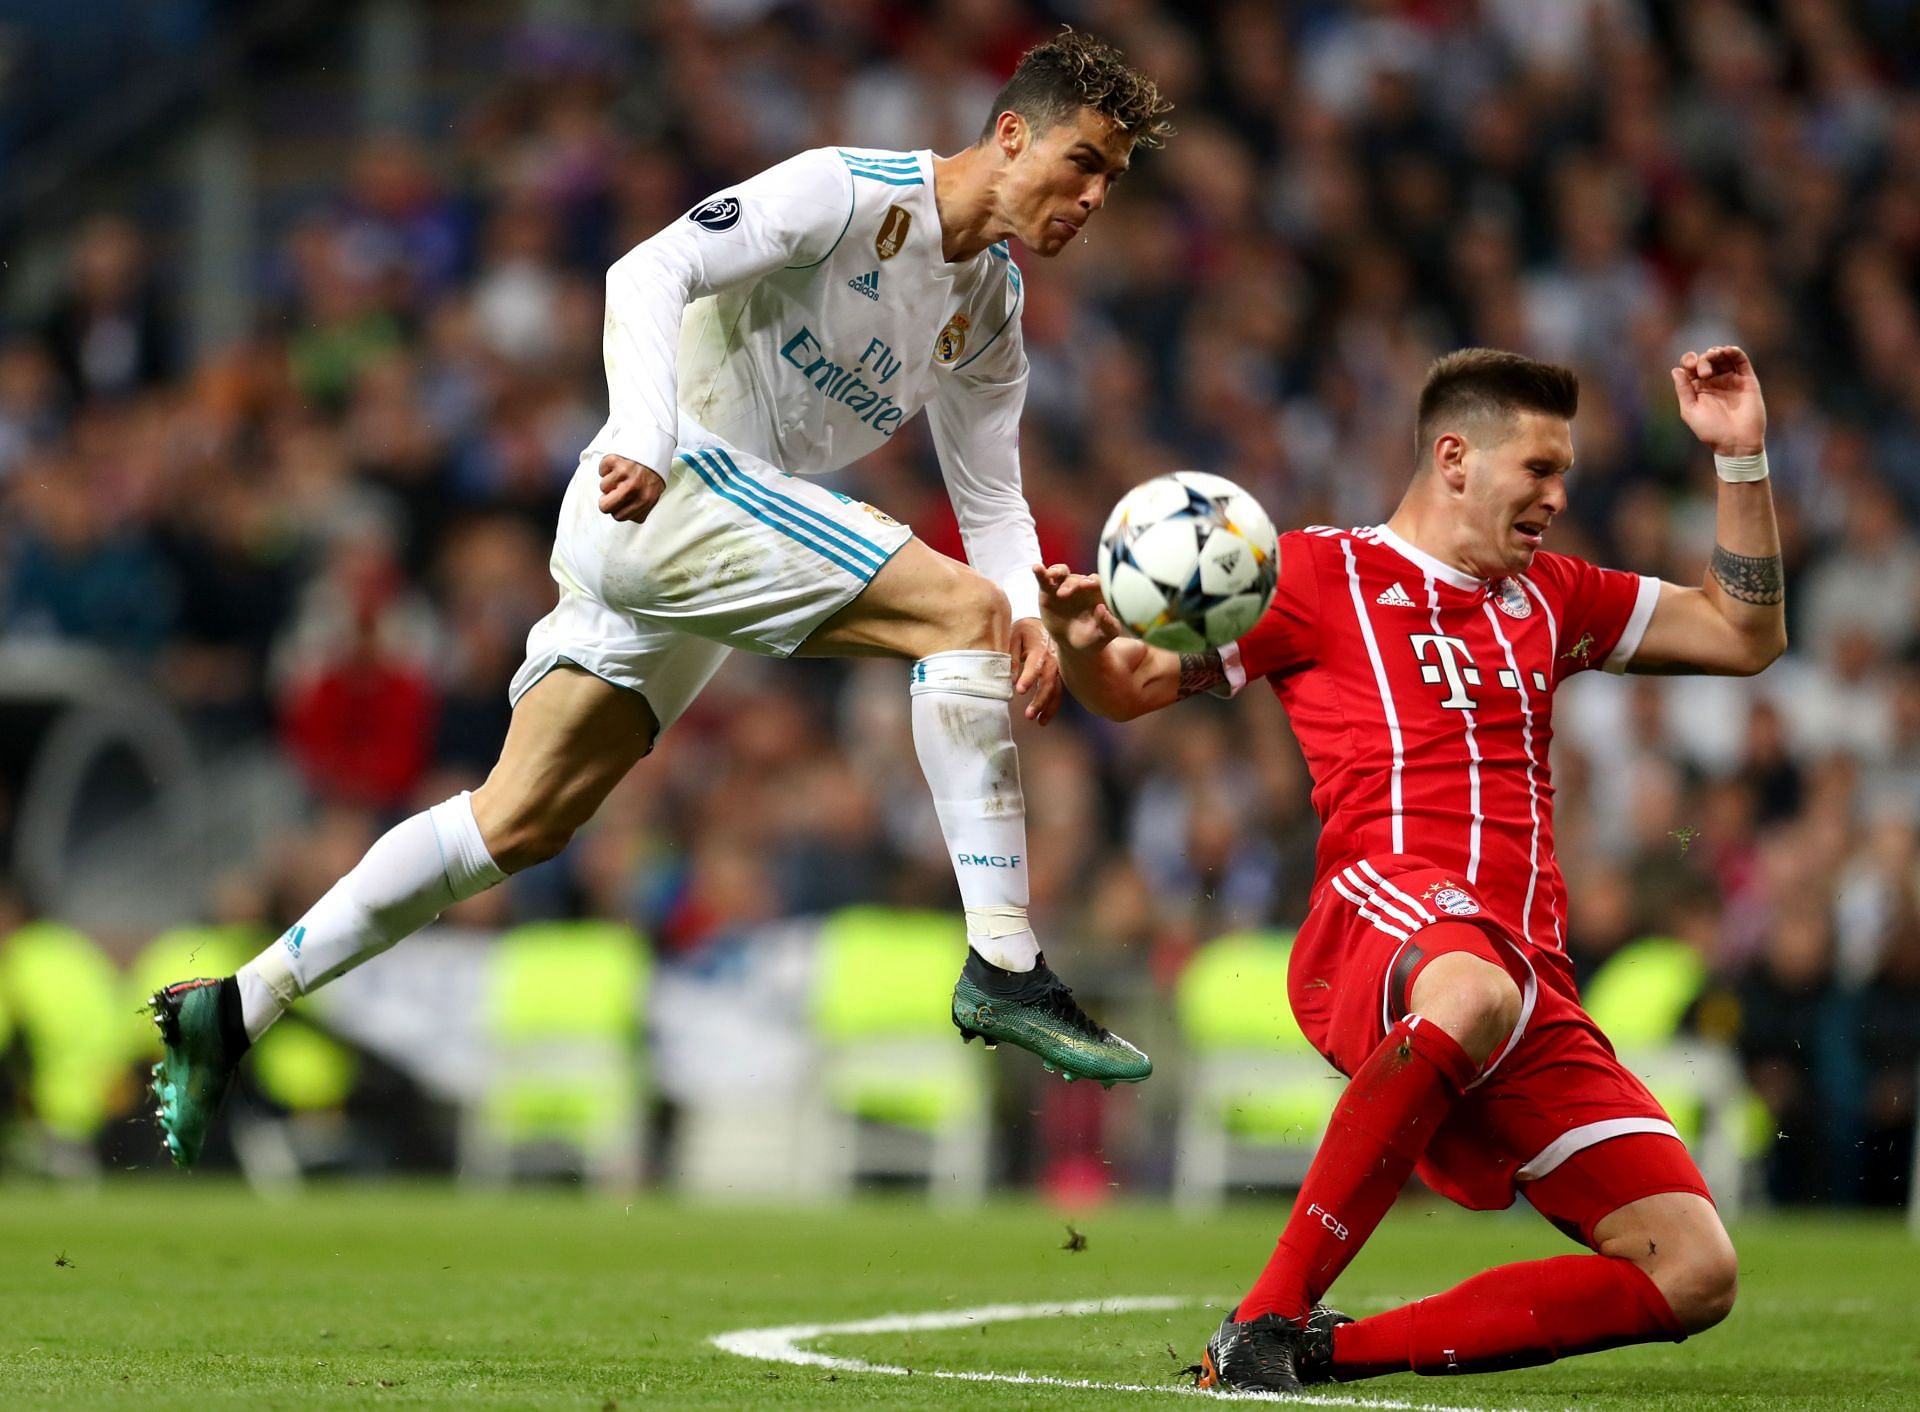 Ronaldo has made mincemeat of Bayern in the past